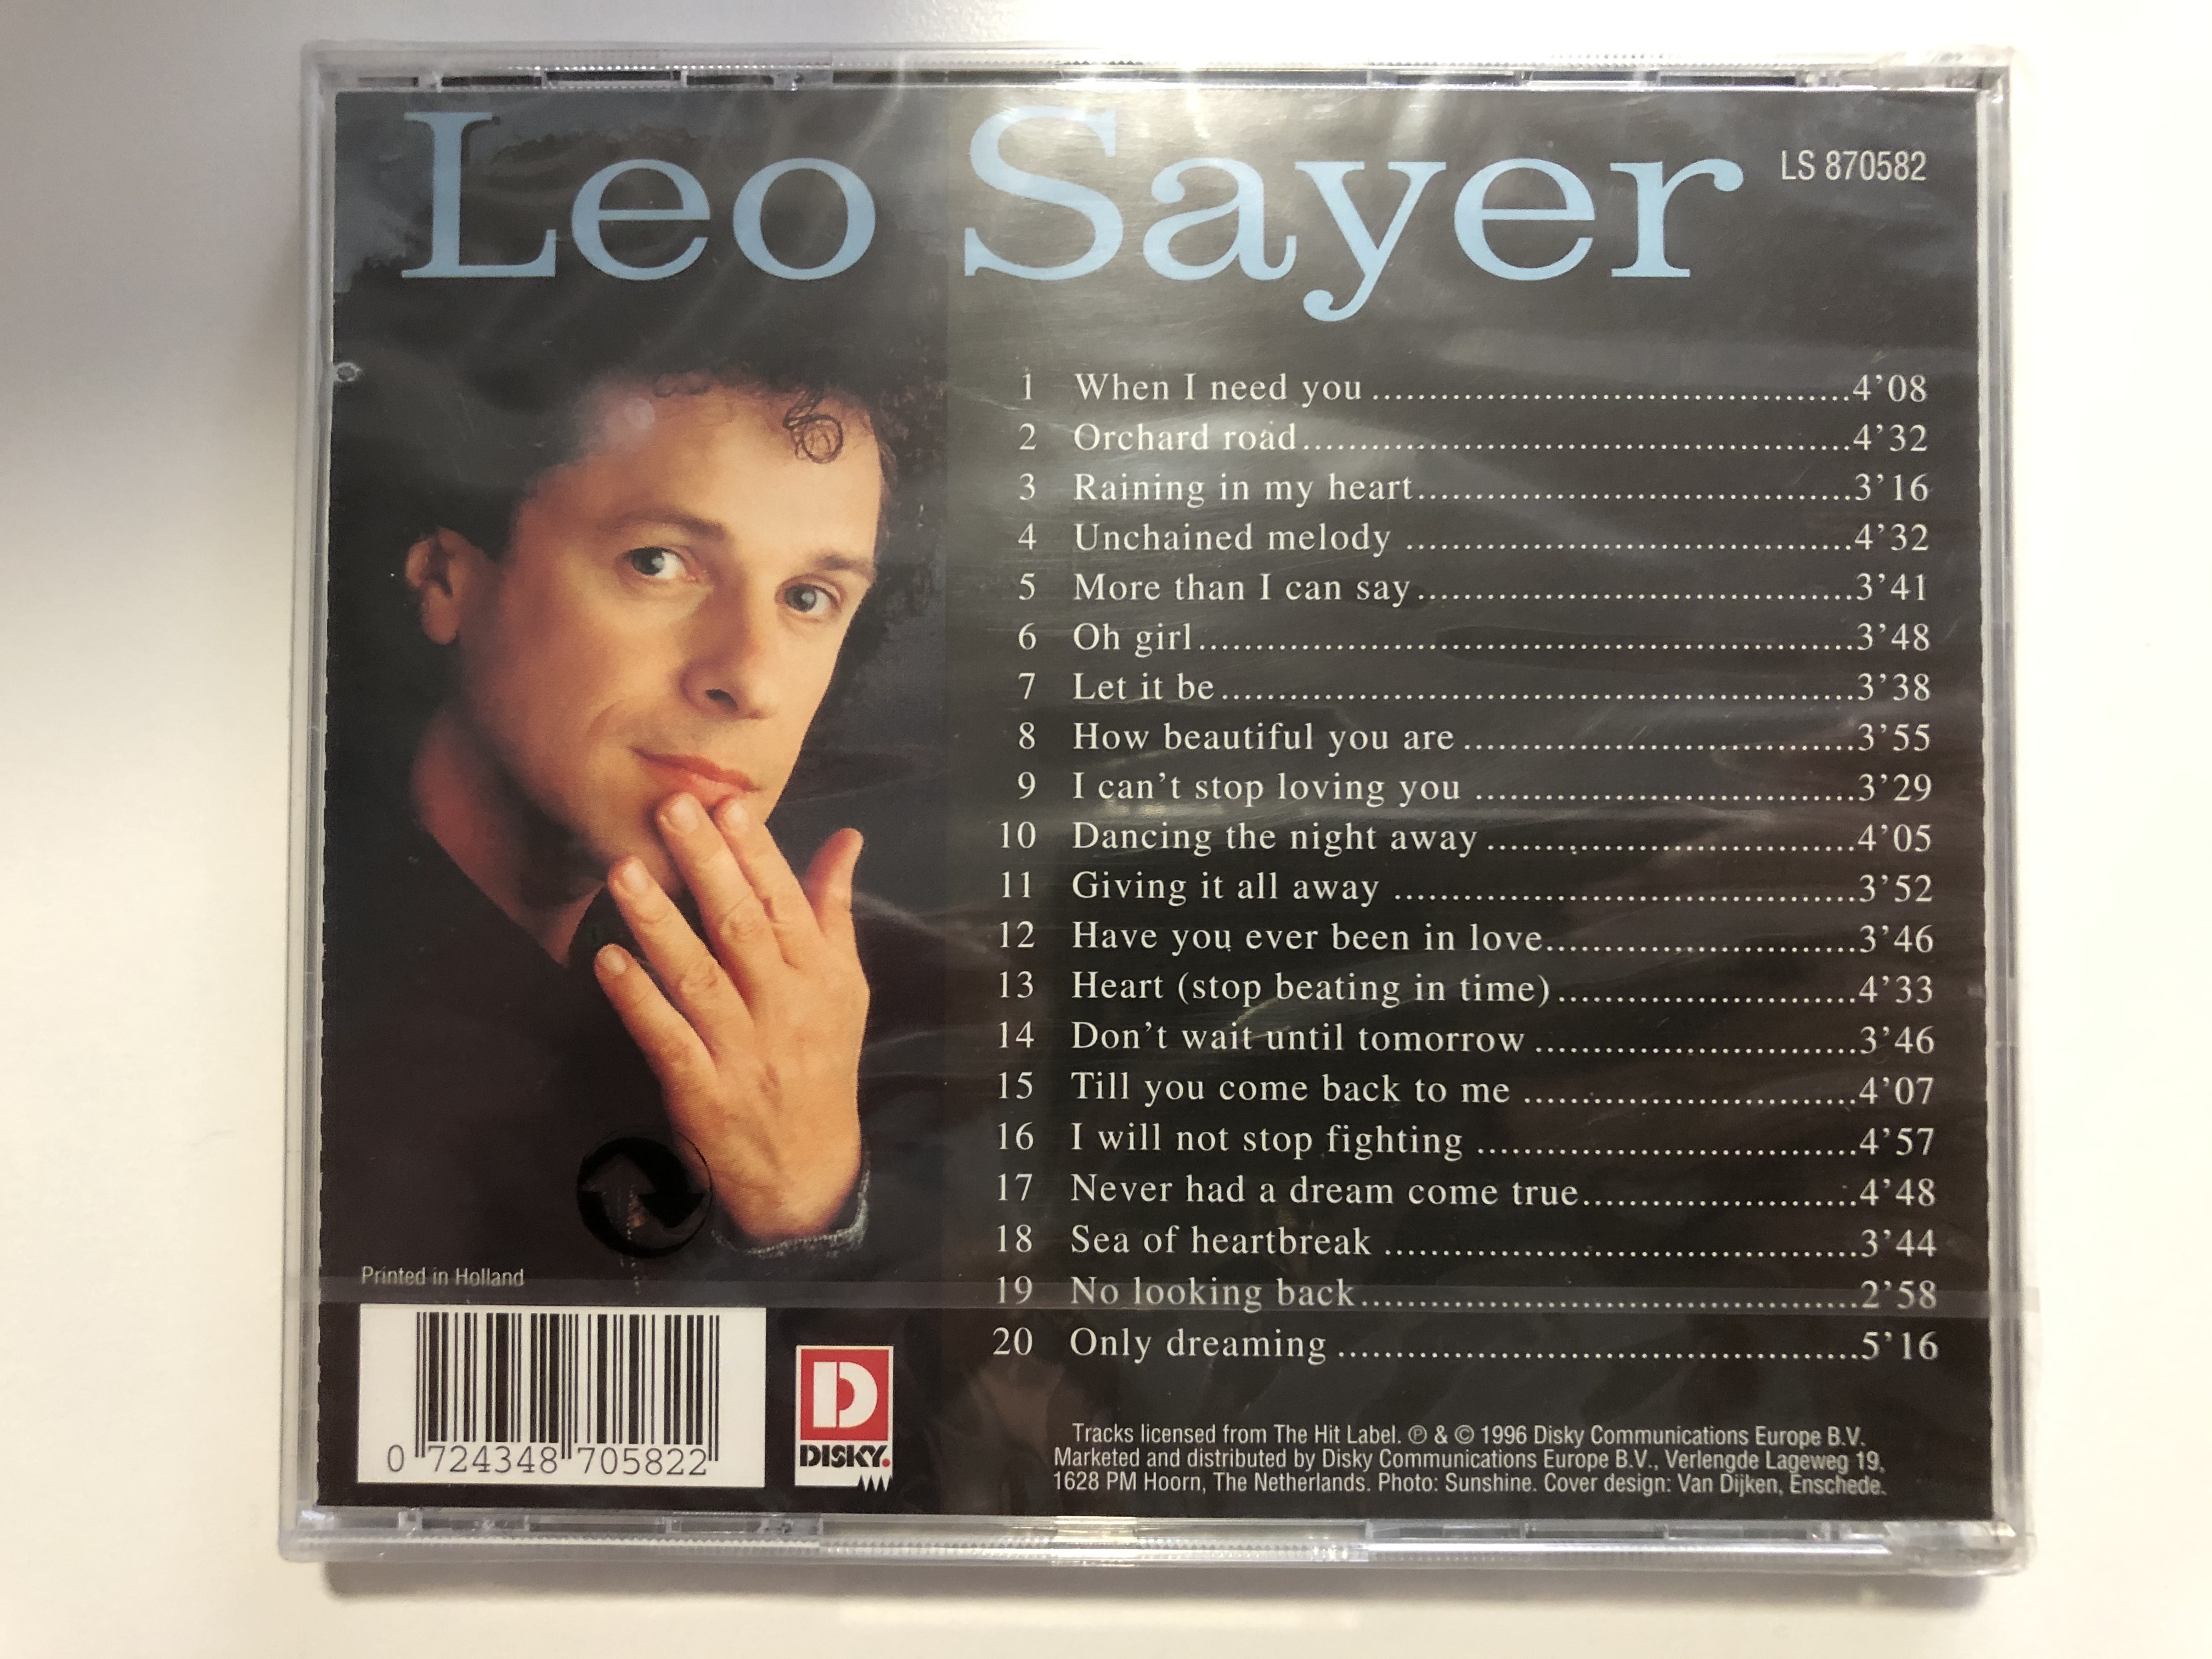 leo-sayer-20-great-love-songs-when-i-need-you-orchard-road-more-than-i-can-say-unchained-melody-i-can-t-stop-loving-you-disky-audio-cd-1996-ls-870582-2-.jpg